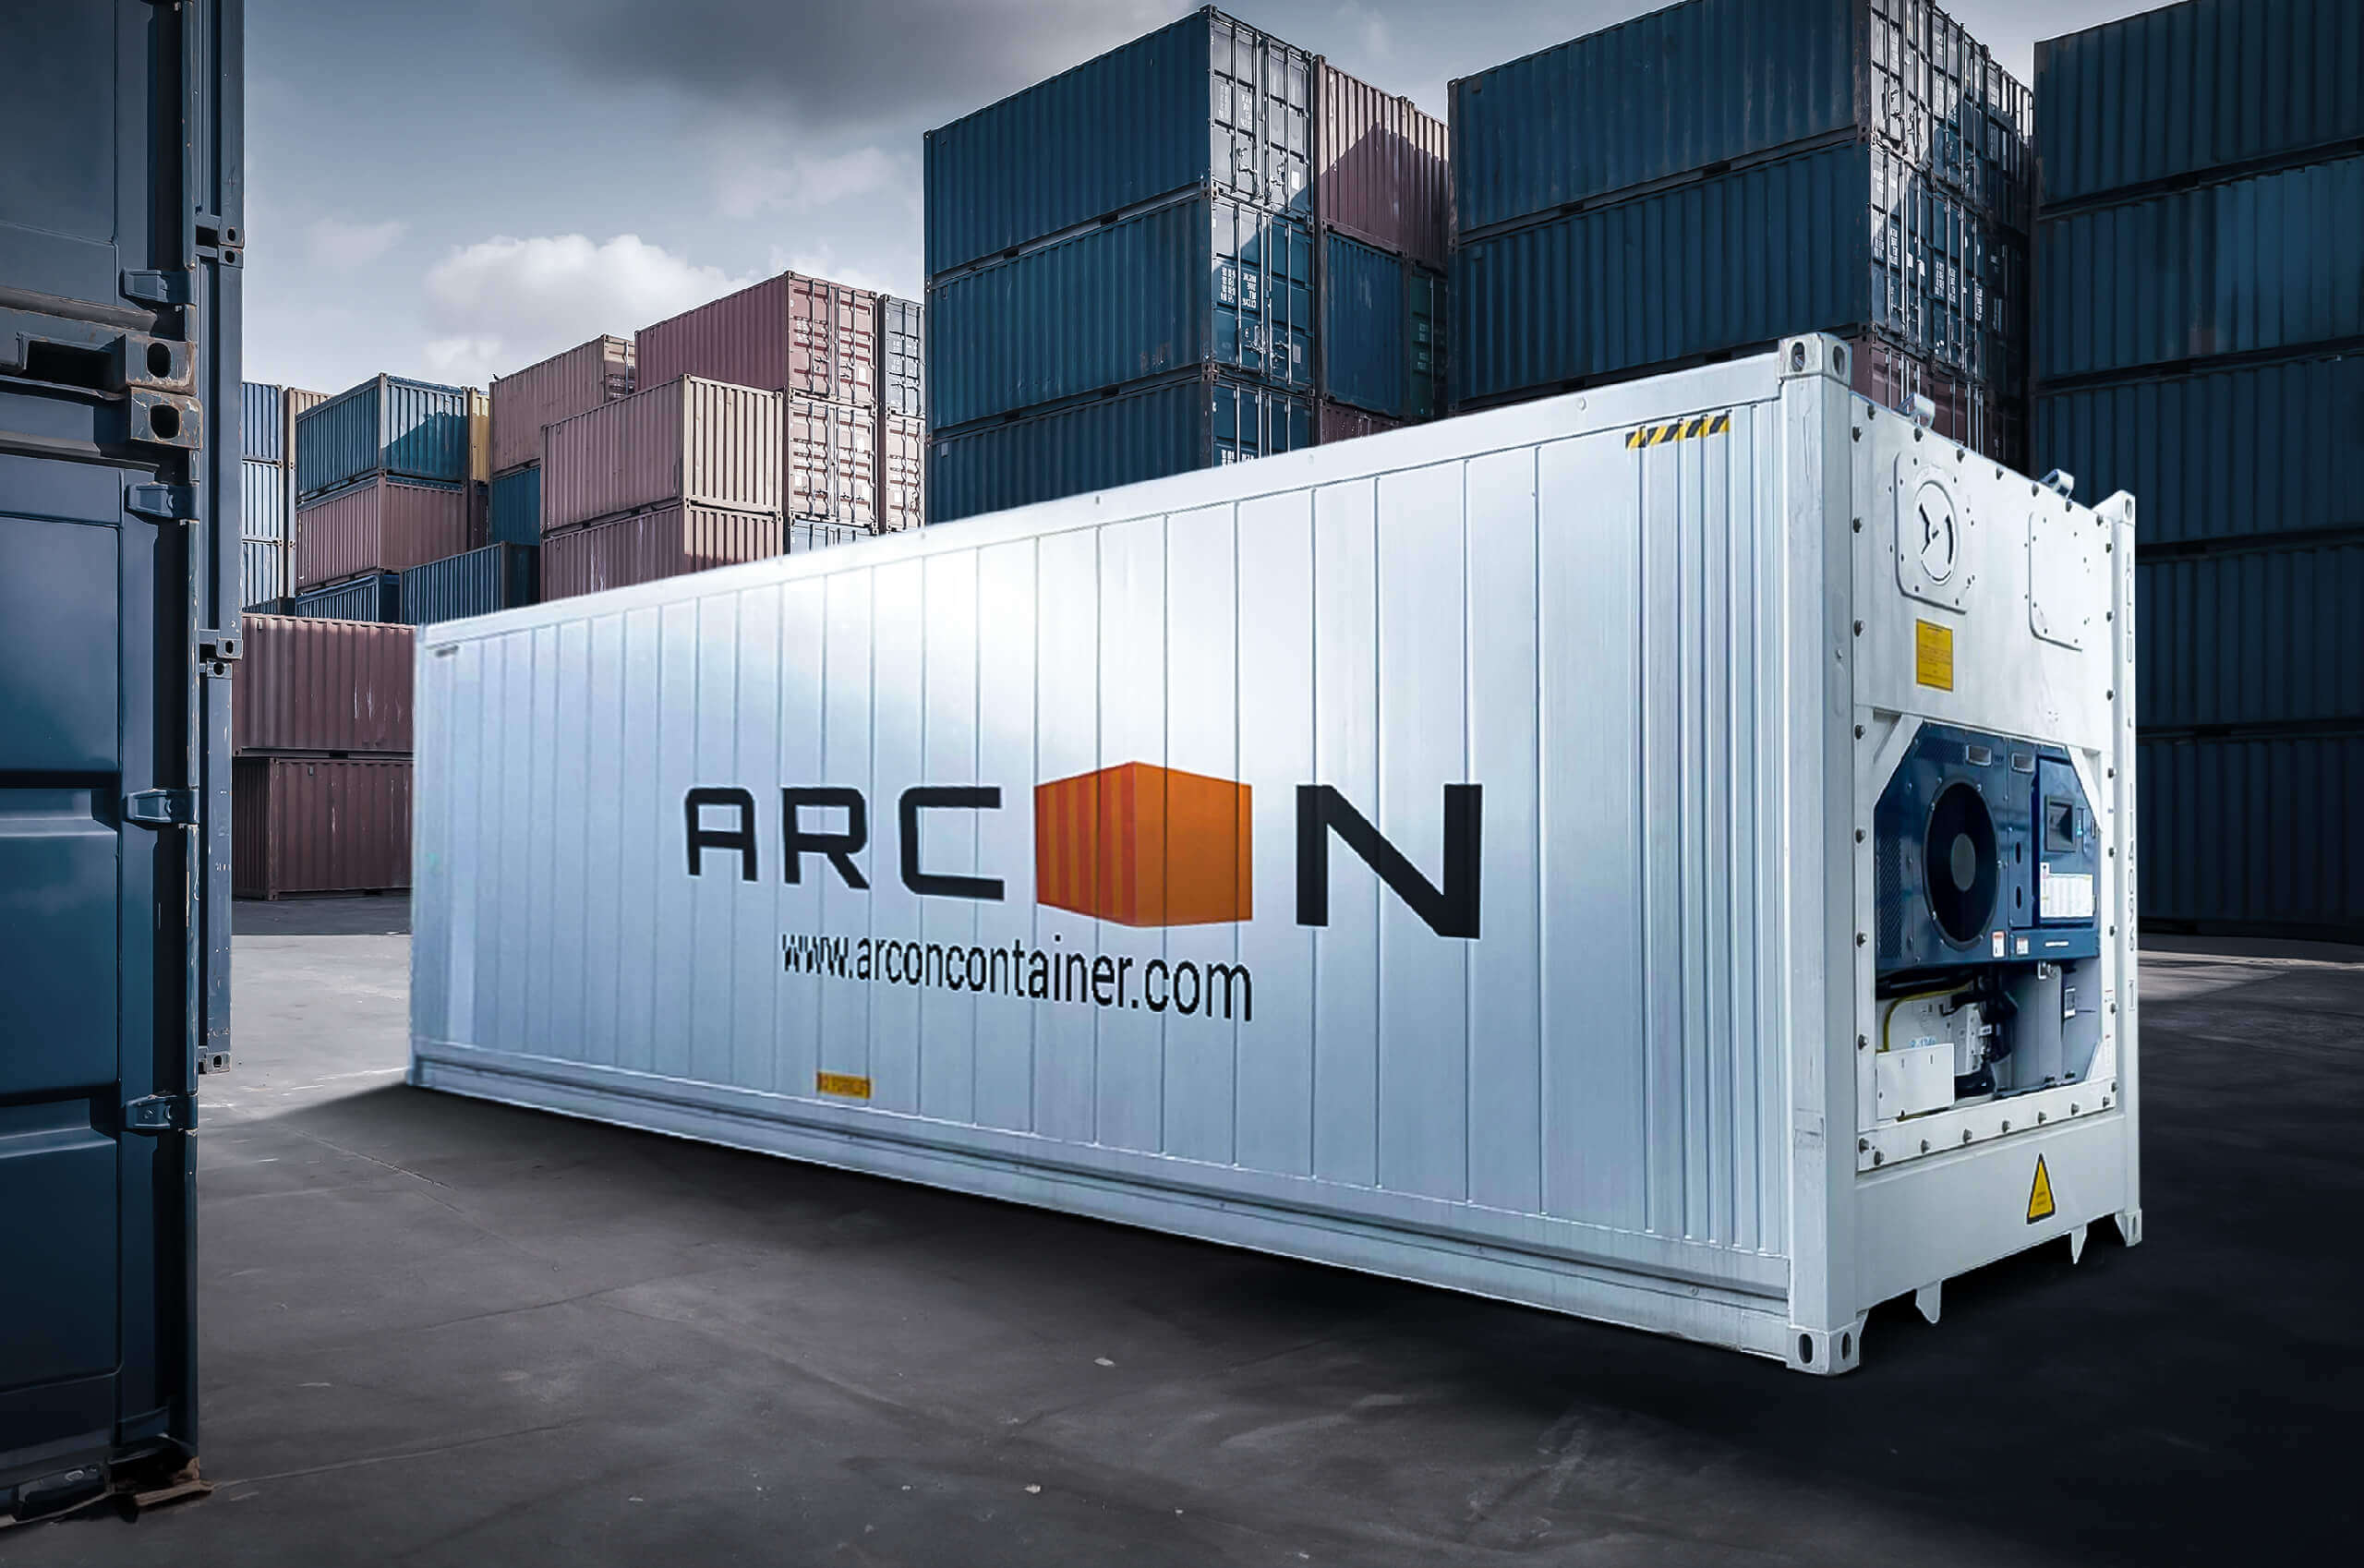 How Do Refrigerated Containers Work?